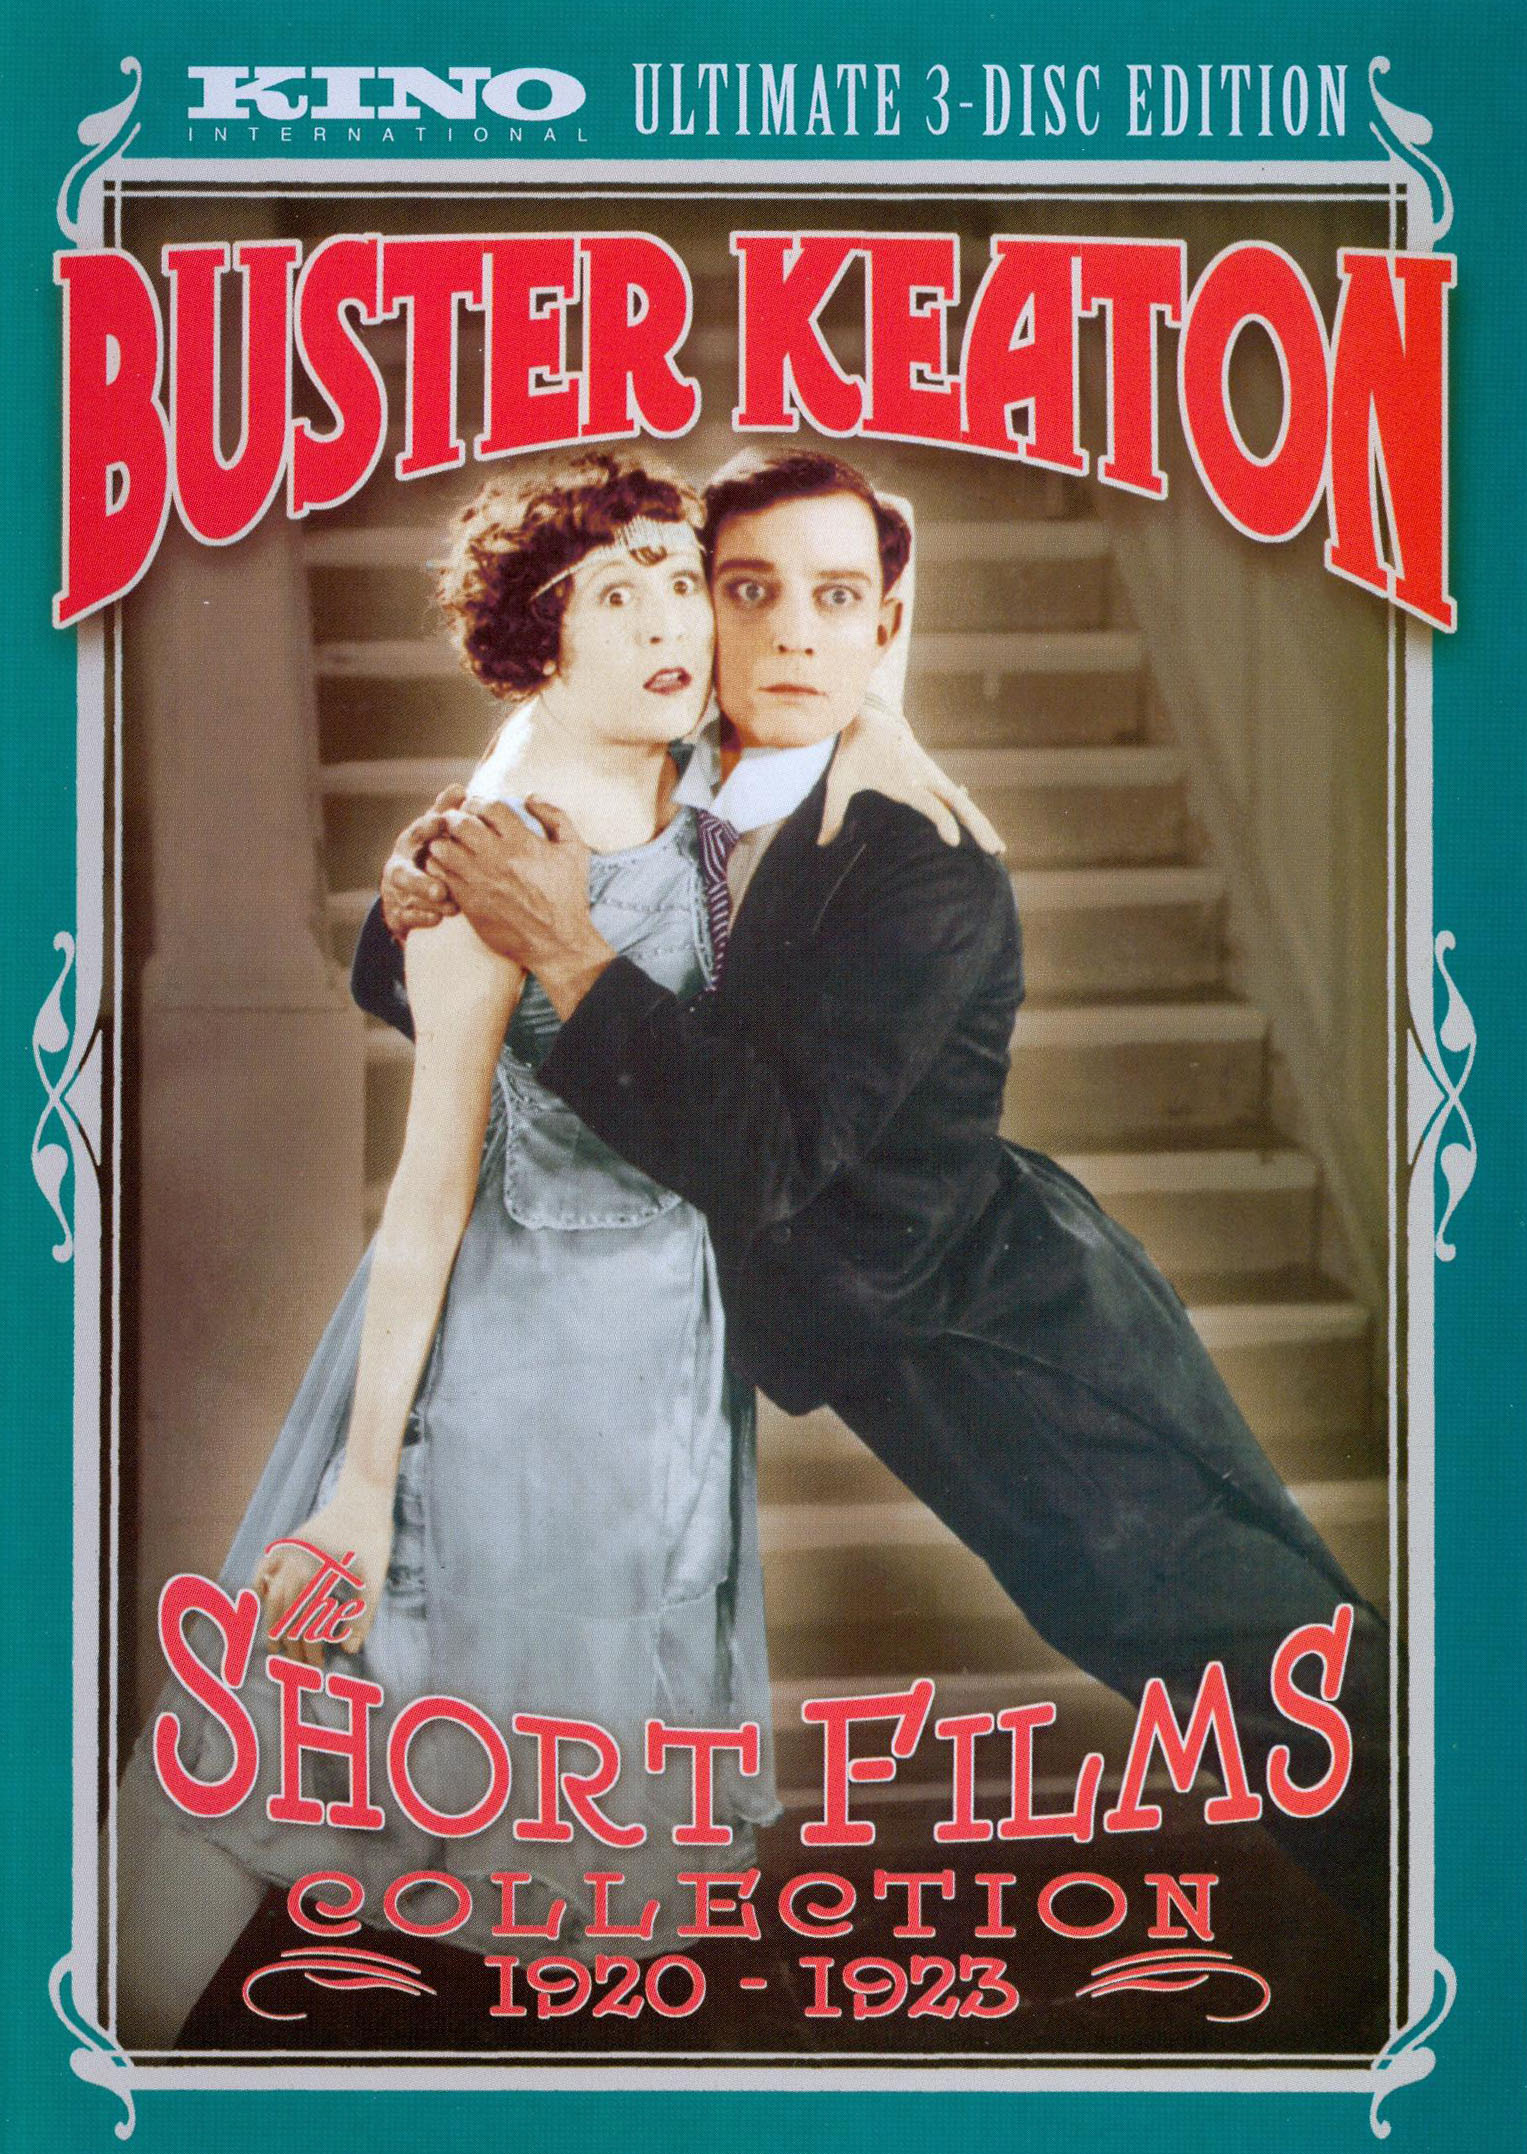 New DVDs: 'Buster Keaton Collection,' 'The Jazz Singer' - The New York Times